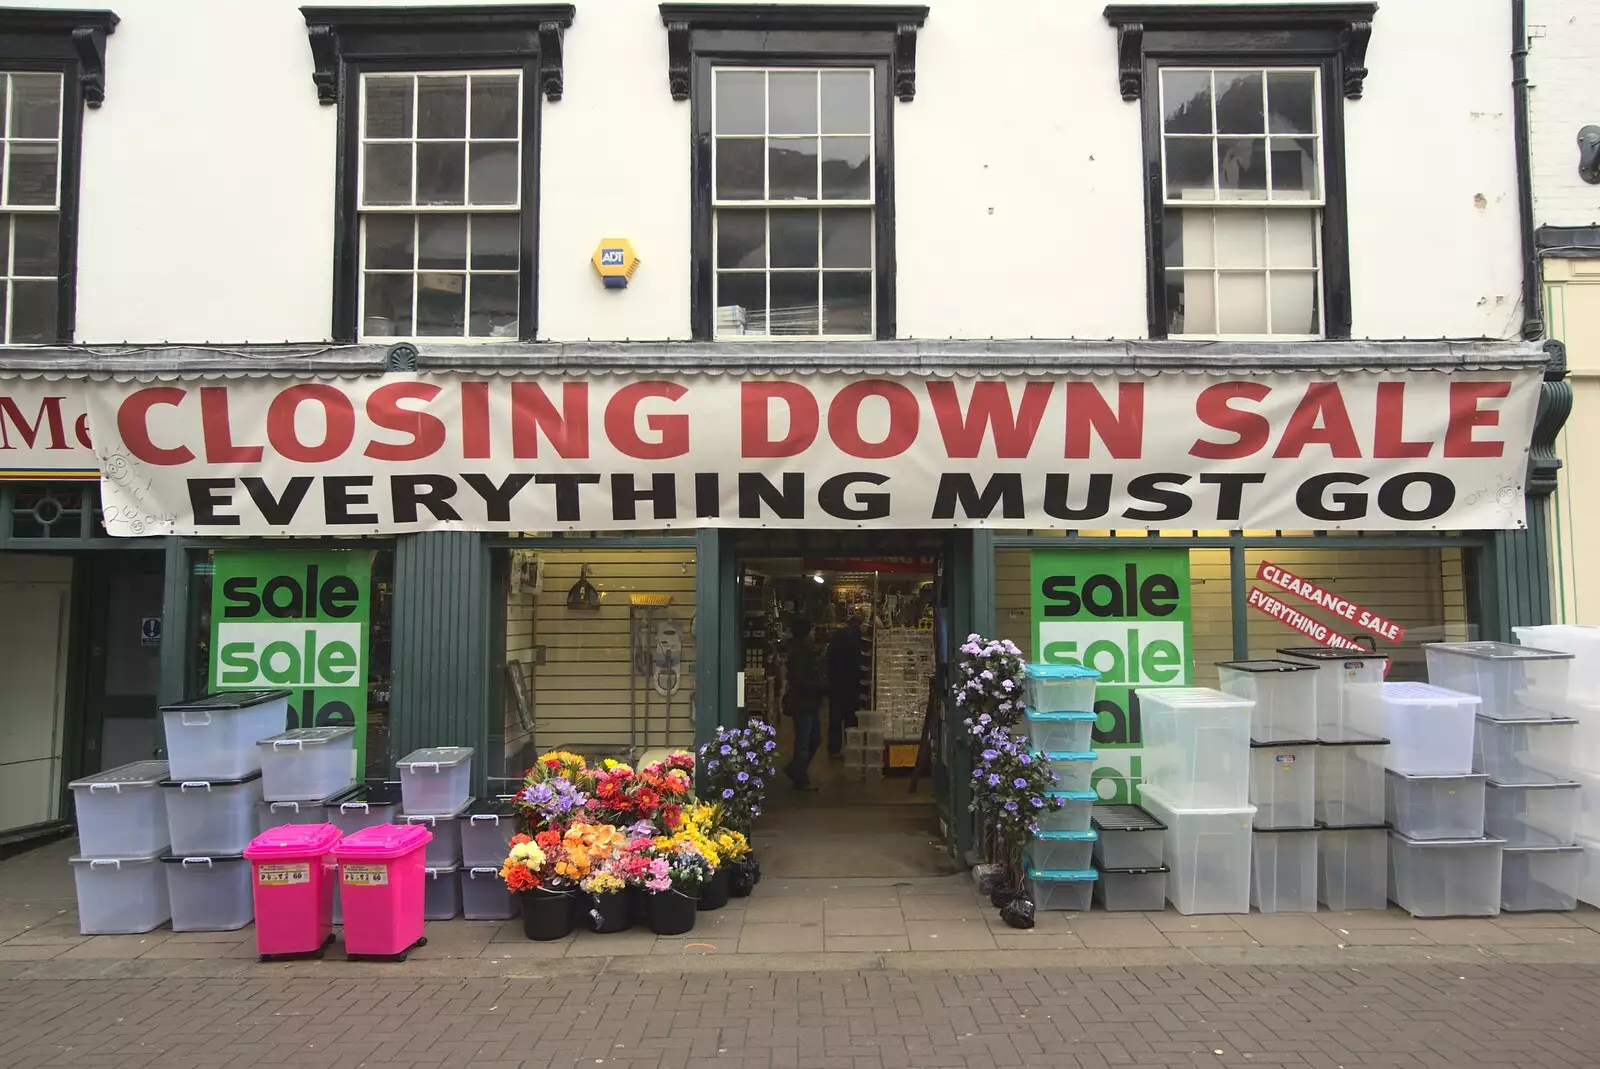 Classic closing-down sign: everything must go, from Pizza in Bury St. Edmunds, Suffolk - 30th January 2011